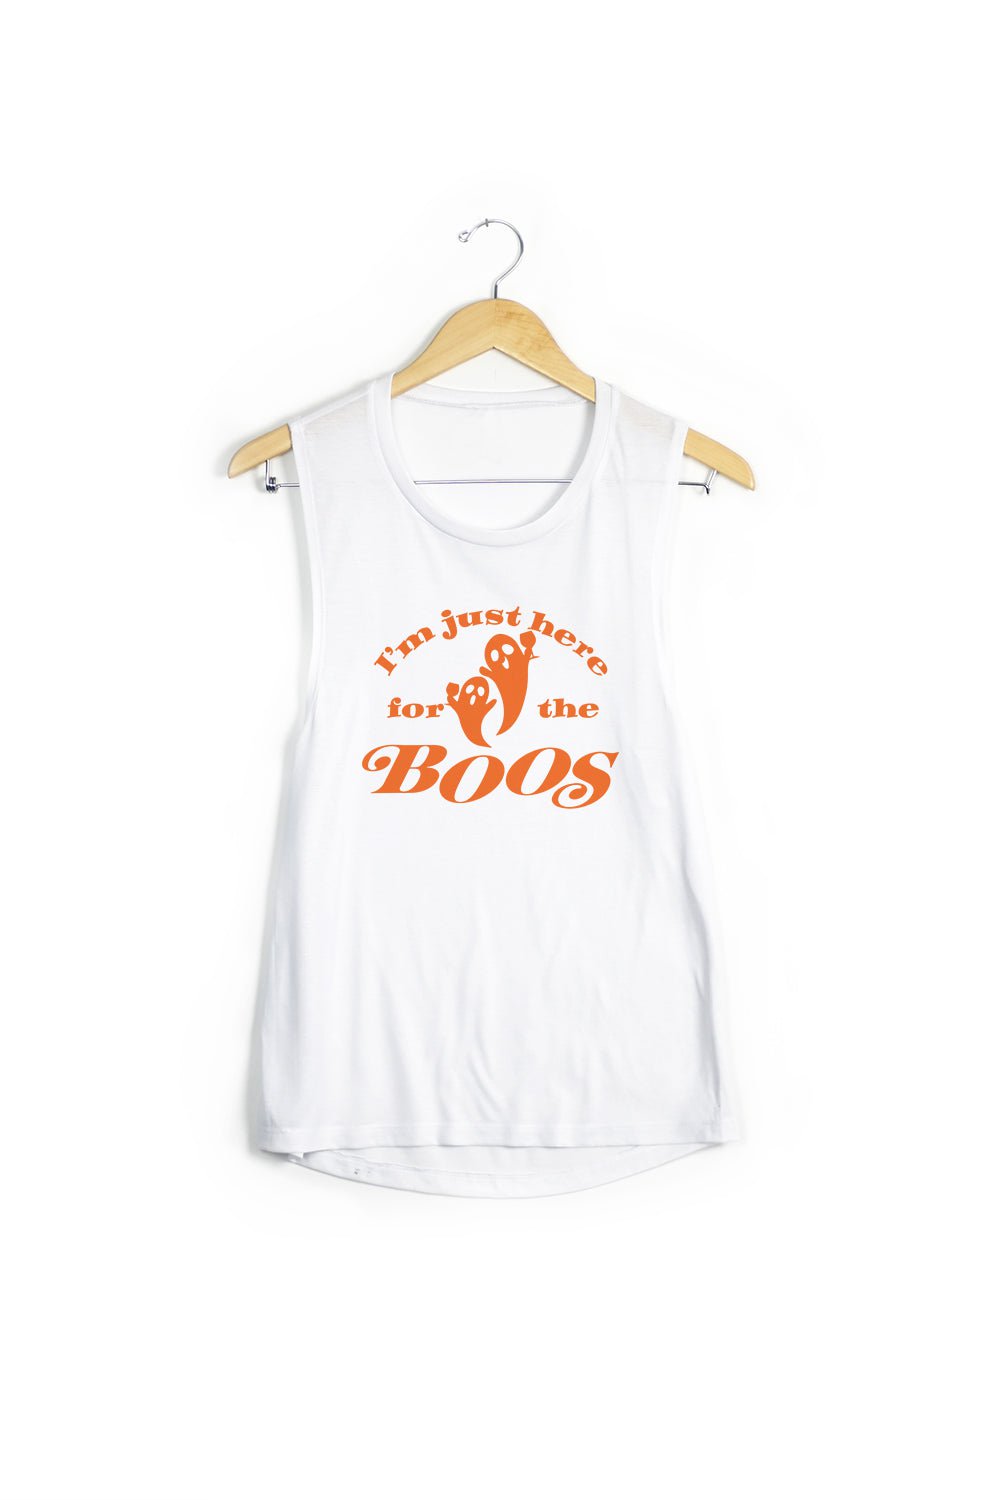 Sarah Marie Design Studio Women's Tank Small / White Here for the Boos Muscle Tank